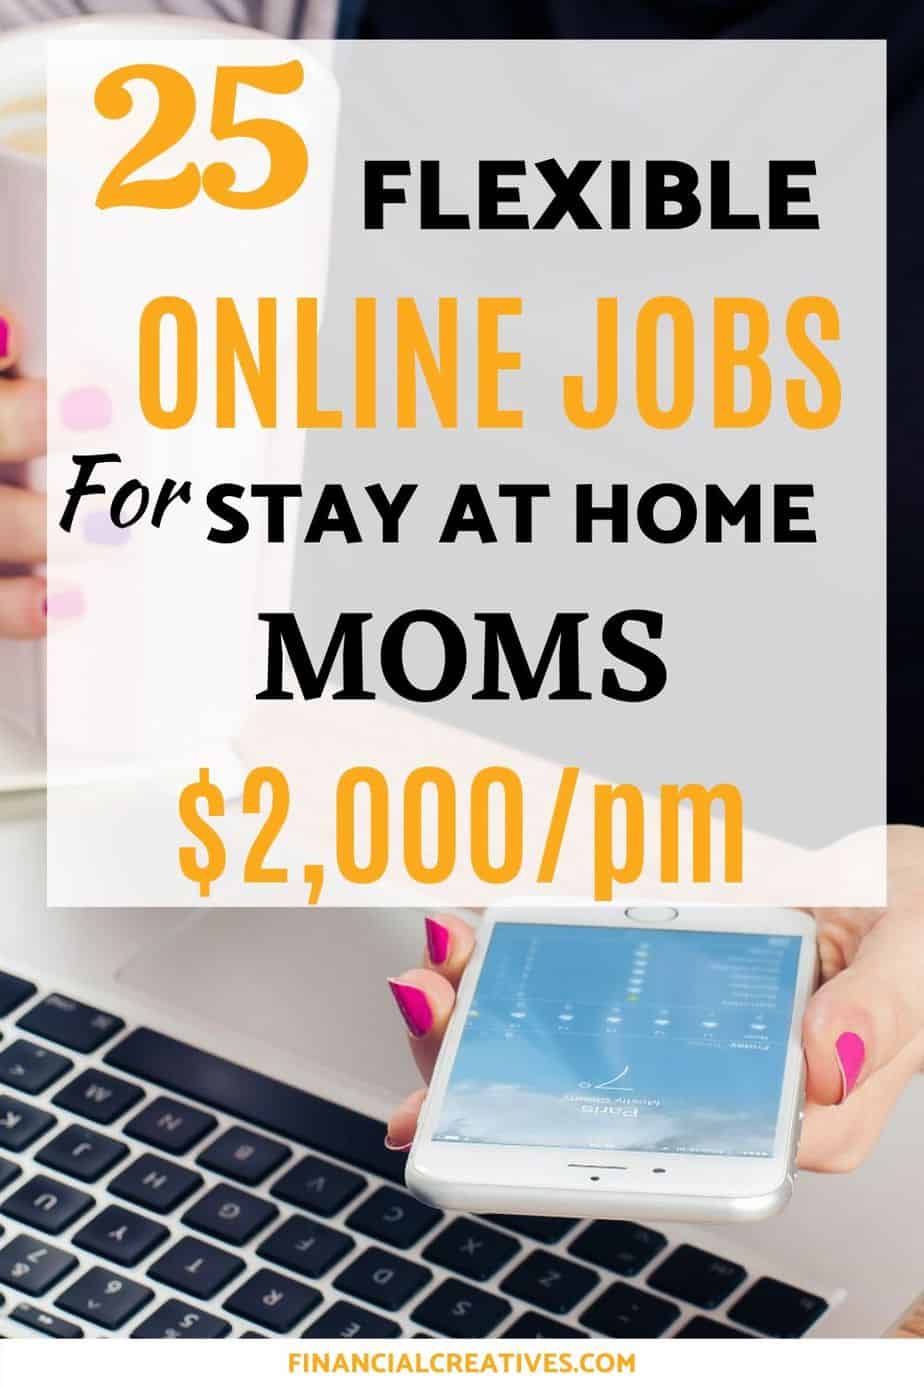 Online Jobs for Stay At Home Moms